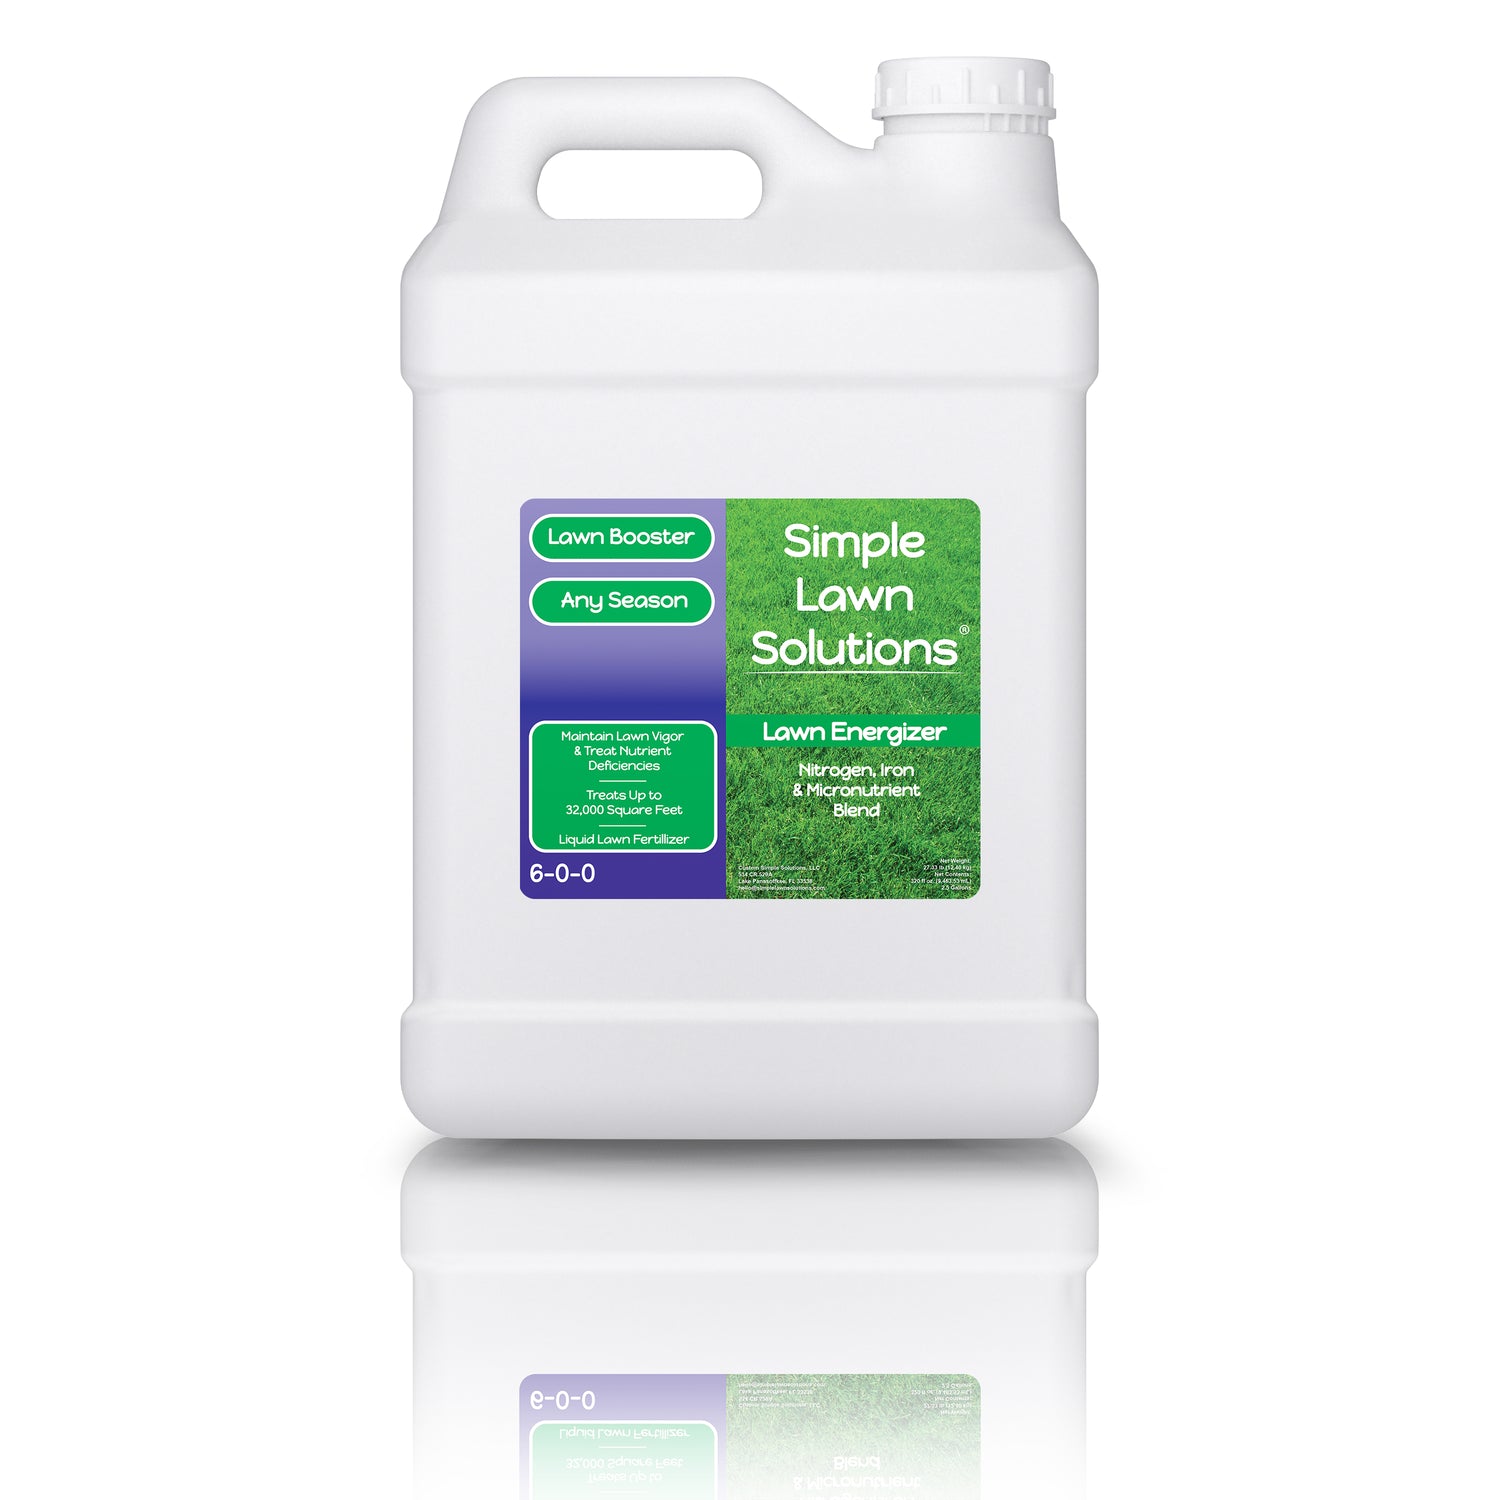 6-0-0 Lawn Energizer (2.5 Gallon) by Simple Lawn Solutions